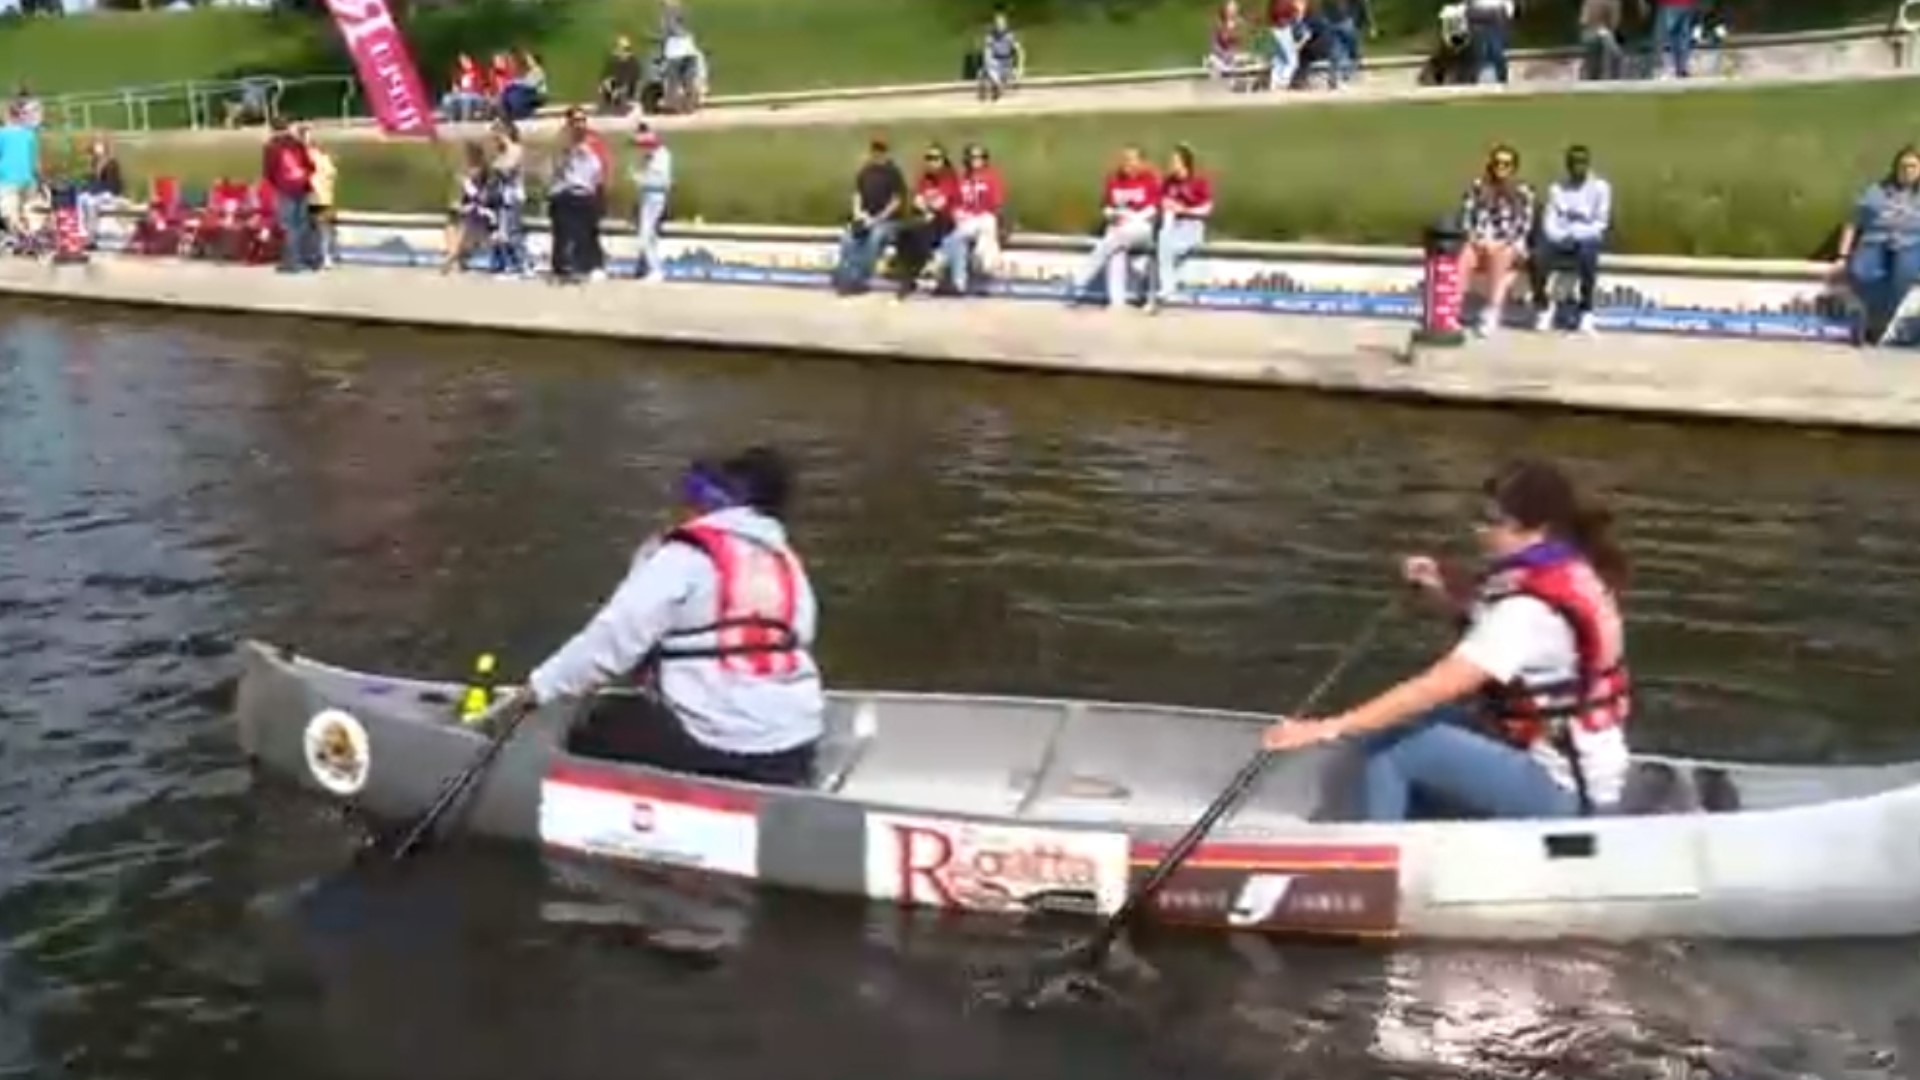 Their slogan is "You gotta regatta." It's a series of races on the water and a day-long festival for IUPUI.